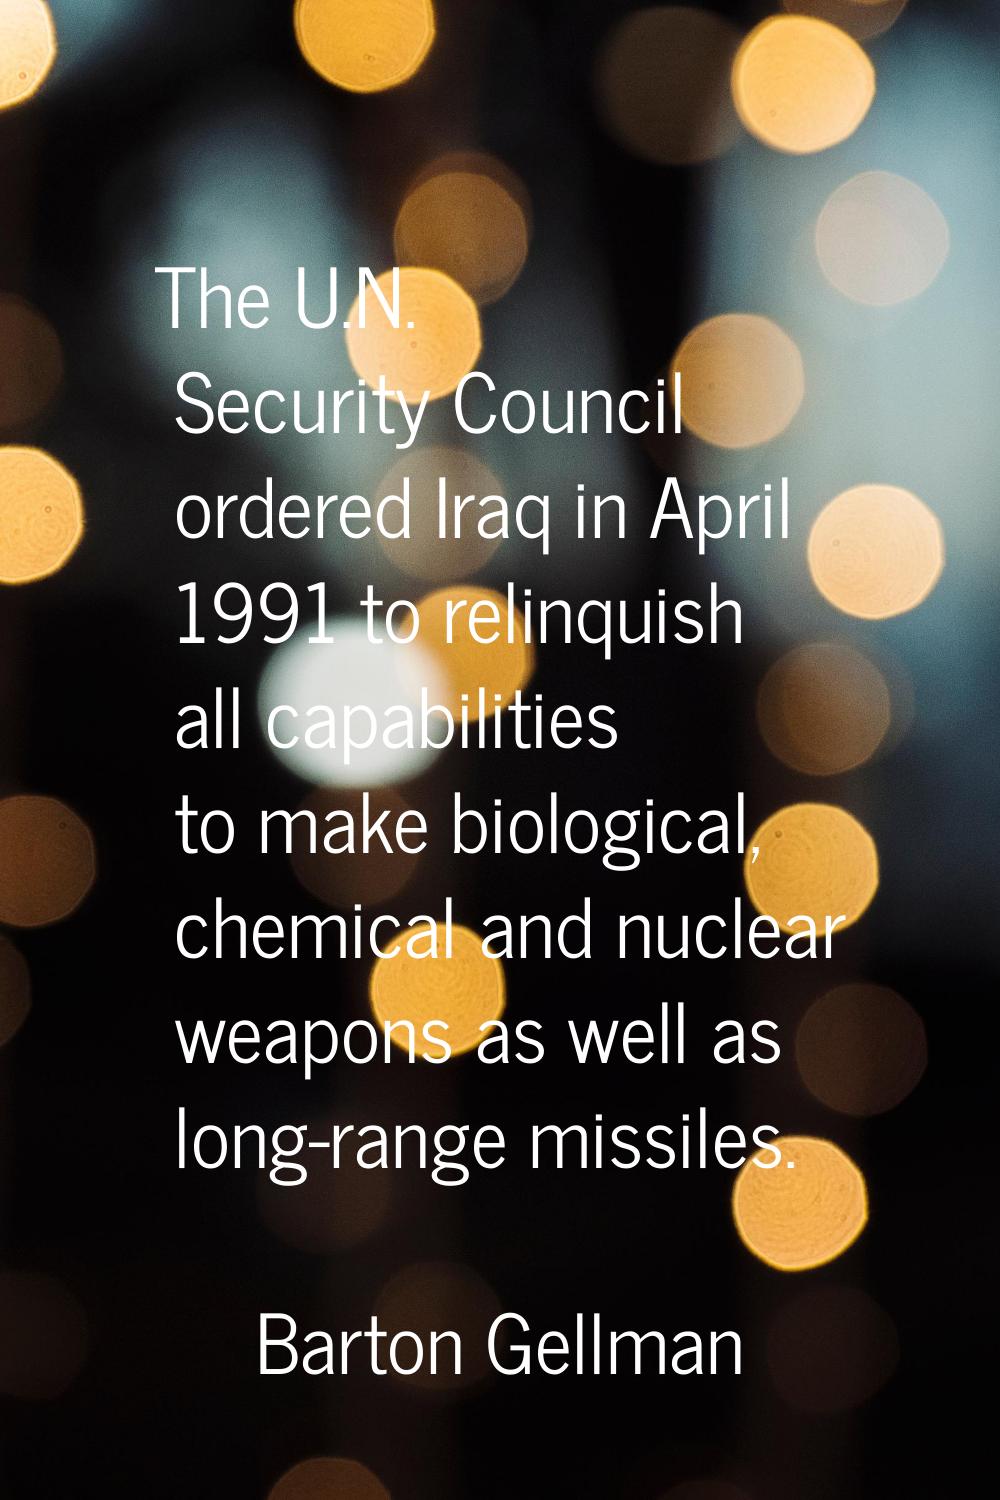 The U.N. Security Council ordered Iraq in April 1991 to relinquish all capabilities to make biologi